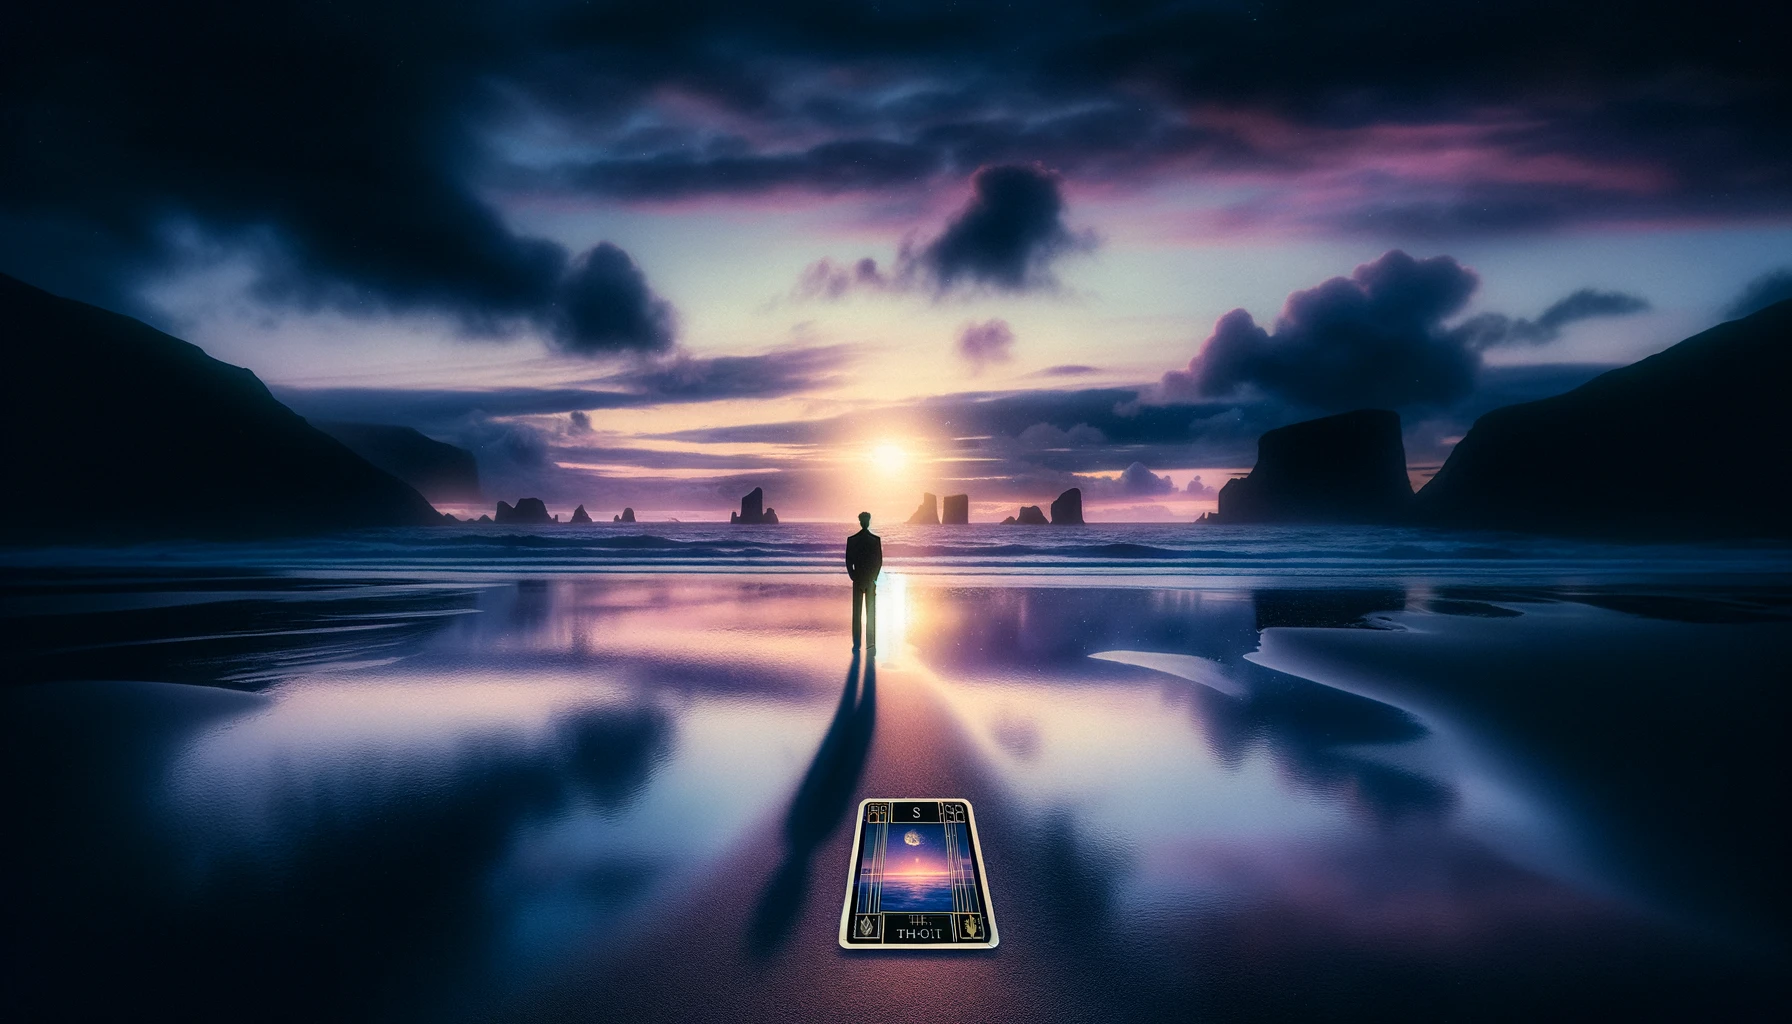 An image of a desolate beach at twilight with a solitary figure standing at the waters edge. The scene captures the contemplative nature of the Eigh